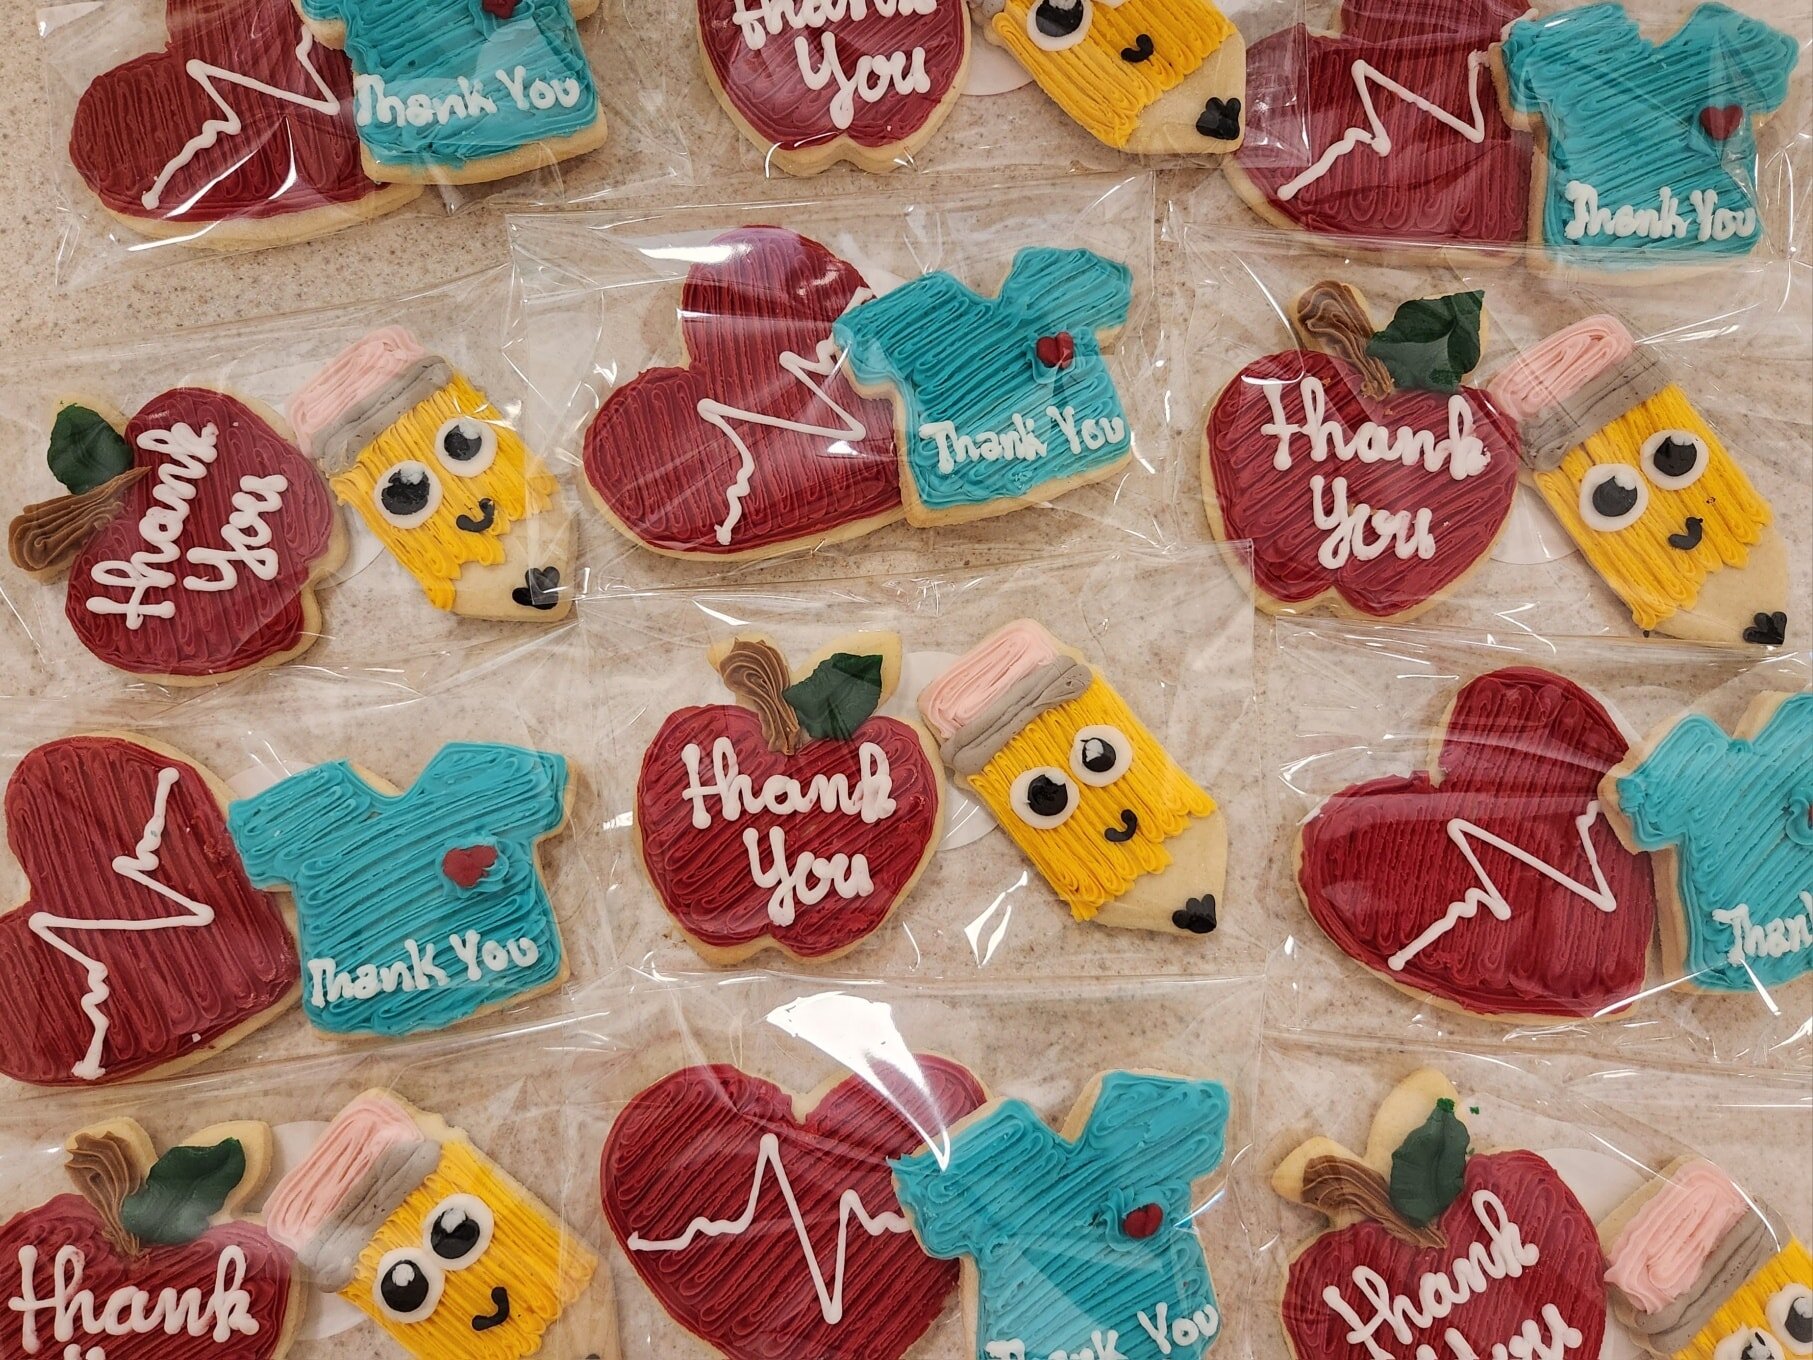 Have you thanked a Teacher this week? What about a nurse? Show them you care the only way we know how... SUGAR COOKIES!! 
While supplies last